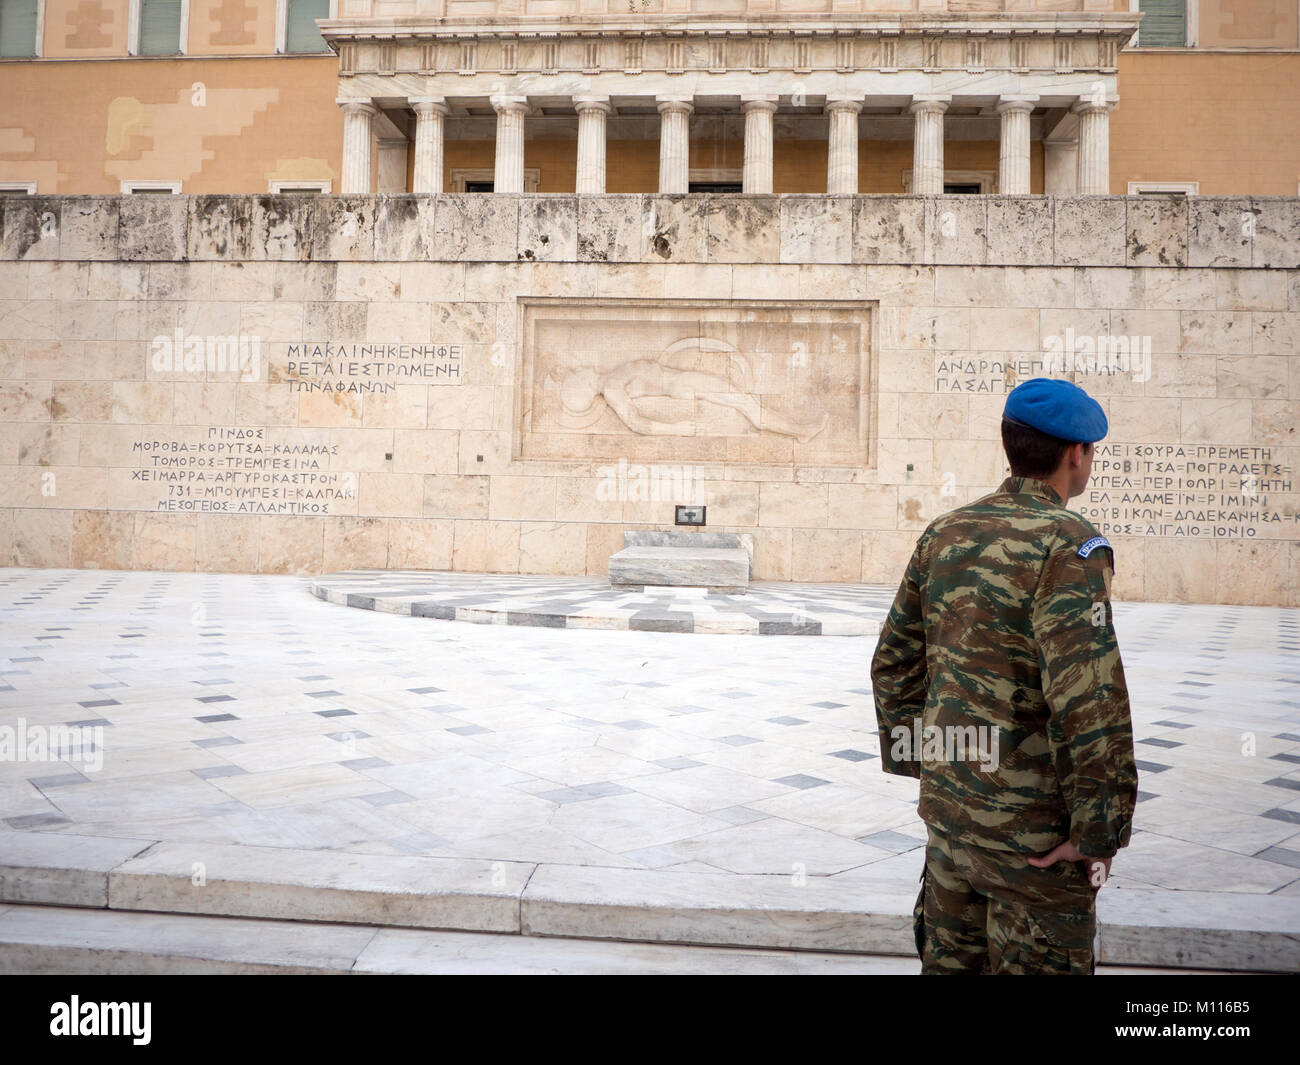 ATHENS,GREECE - MARCH 26, 2016: Presidential guard in front of the greek parliament Stock Photo